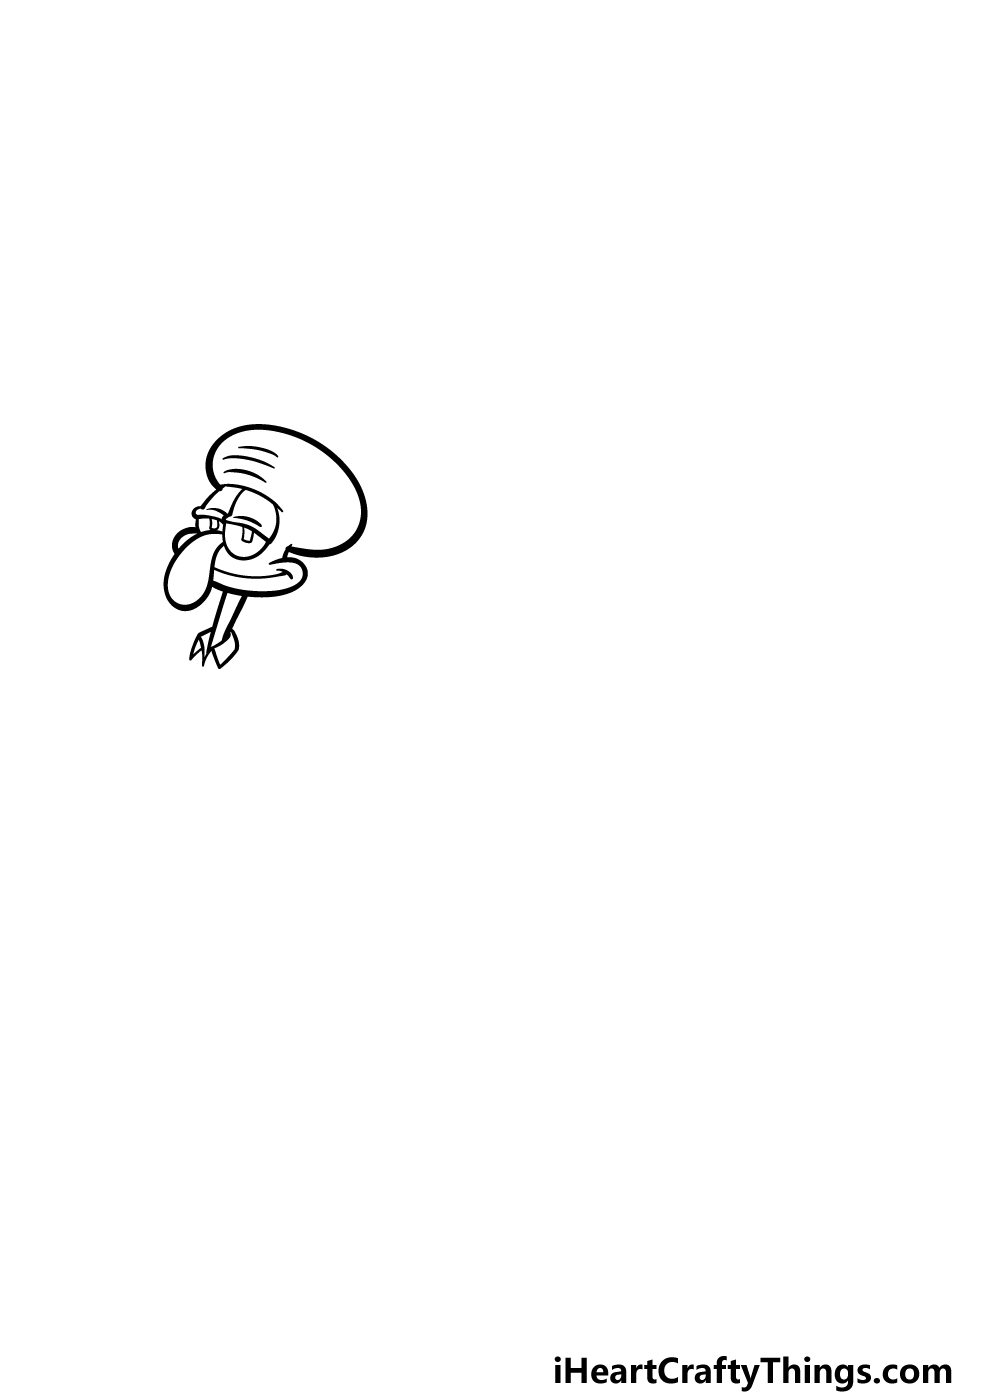 how to draw Spongebob characters step 1